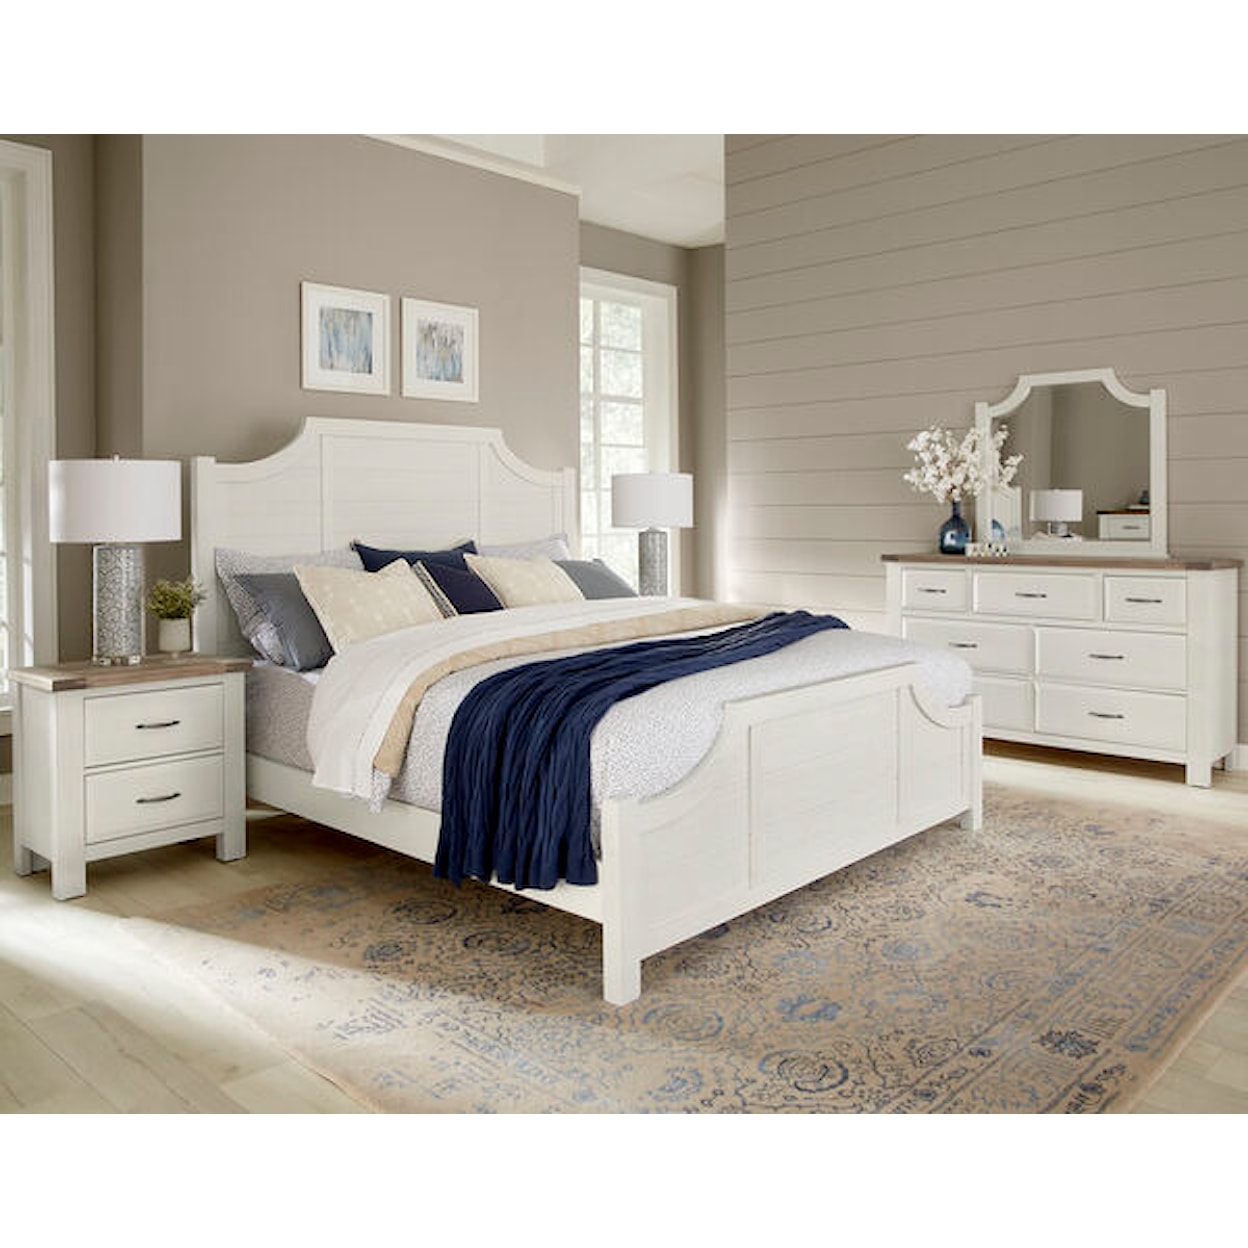 Artisan & Post Maple Road Scalloped Queen Bed 